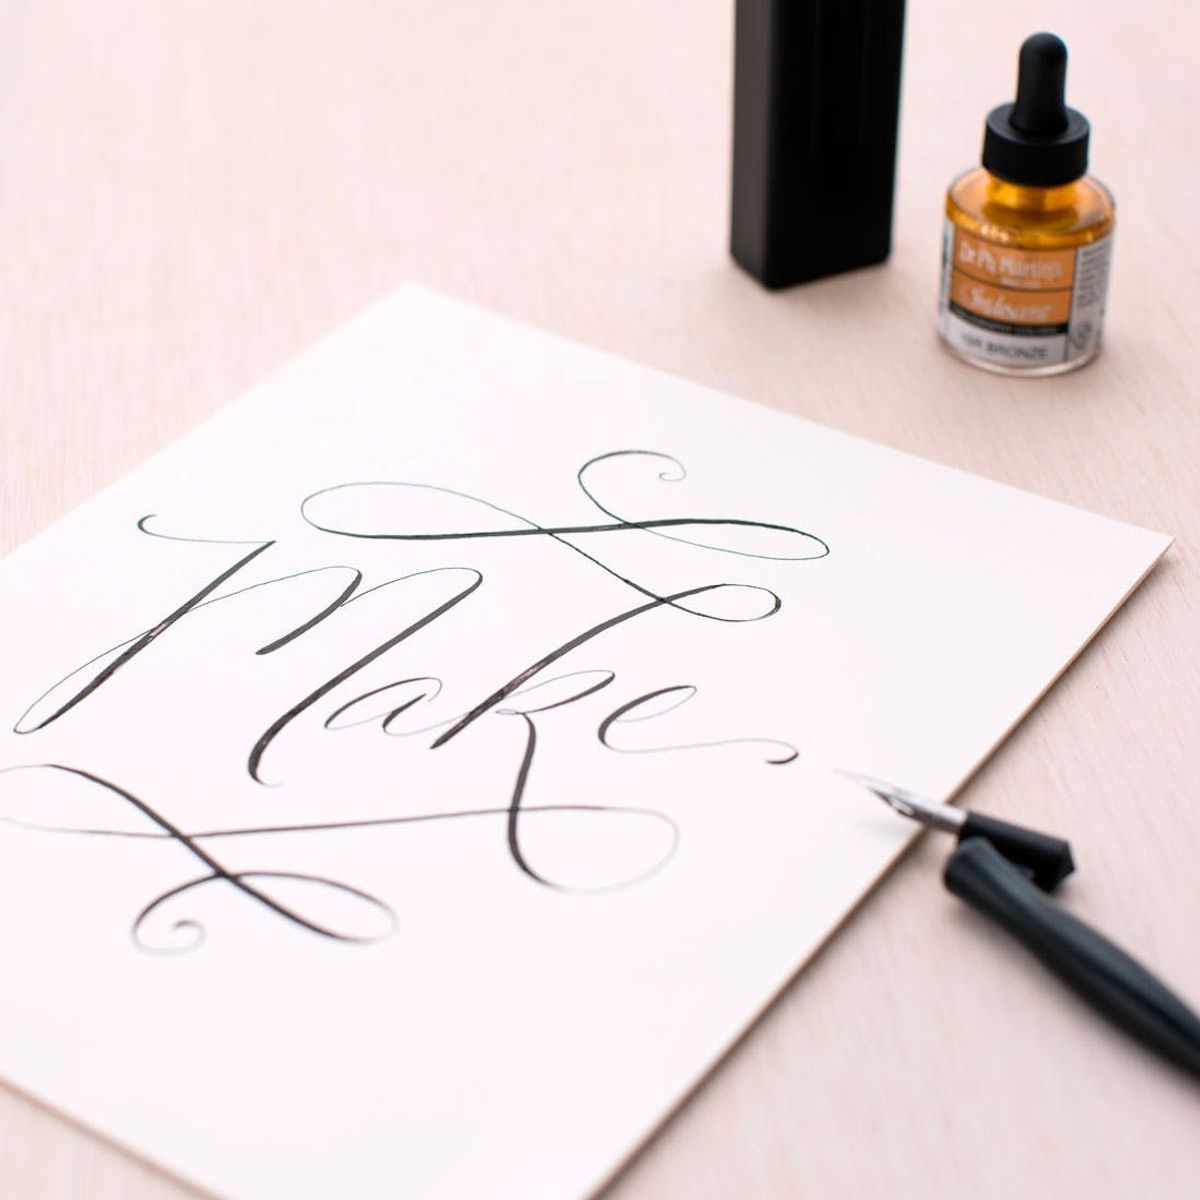 How to Make Calligraphy Wall Art + More Hand-Drawn Awesomeness